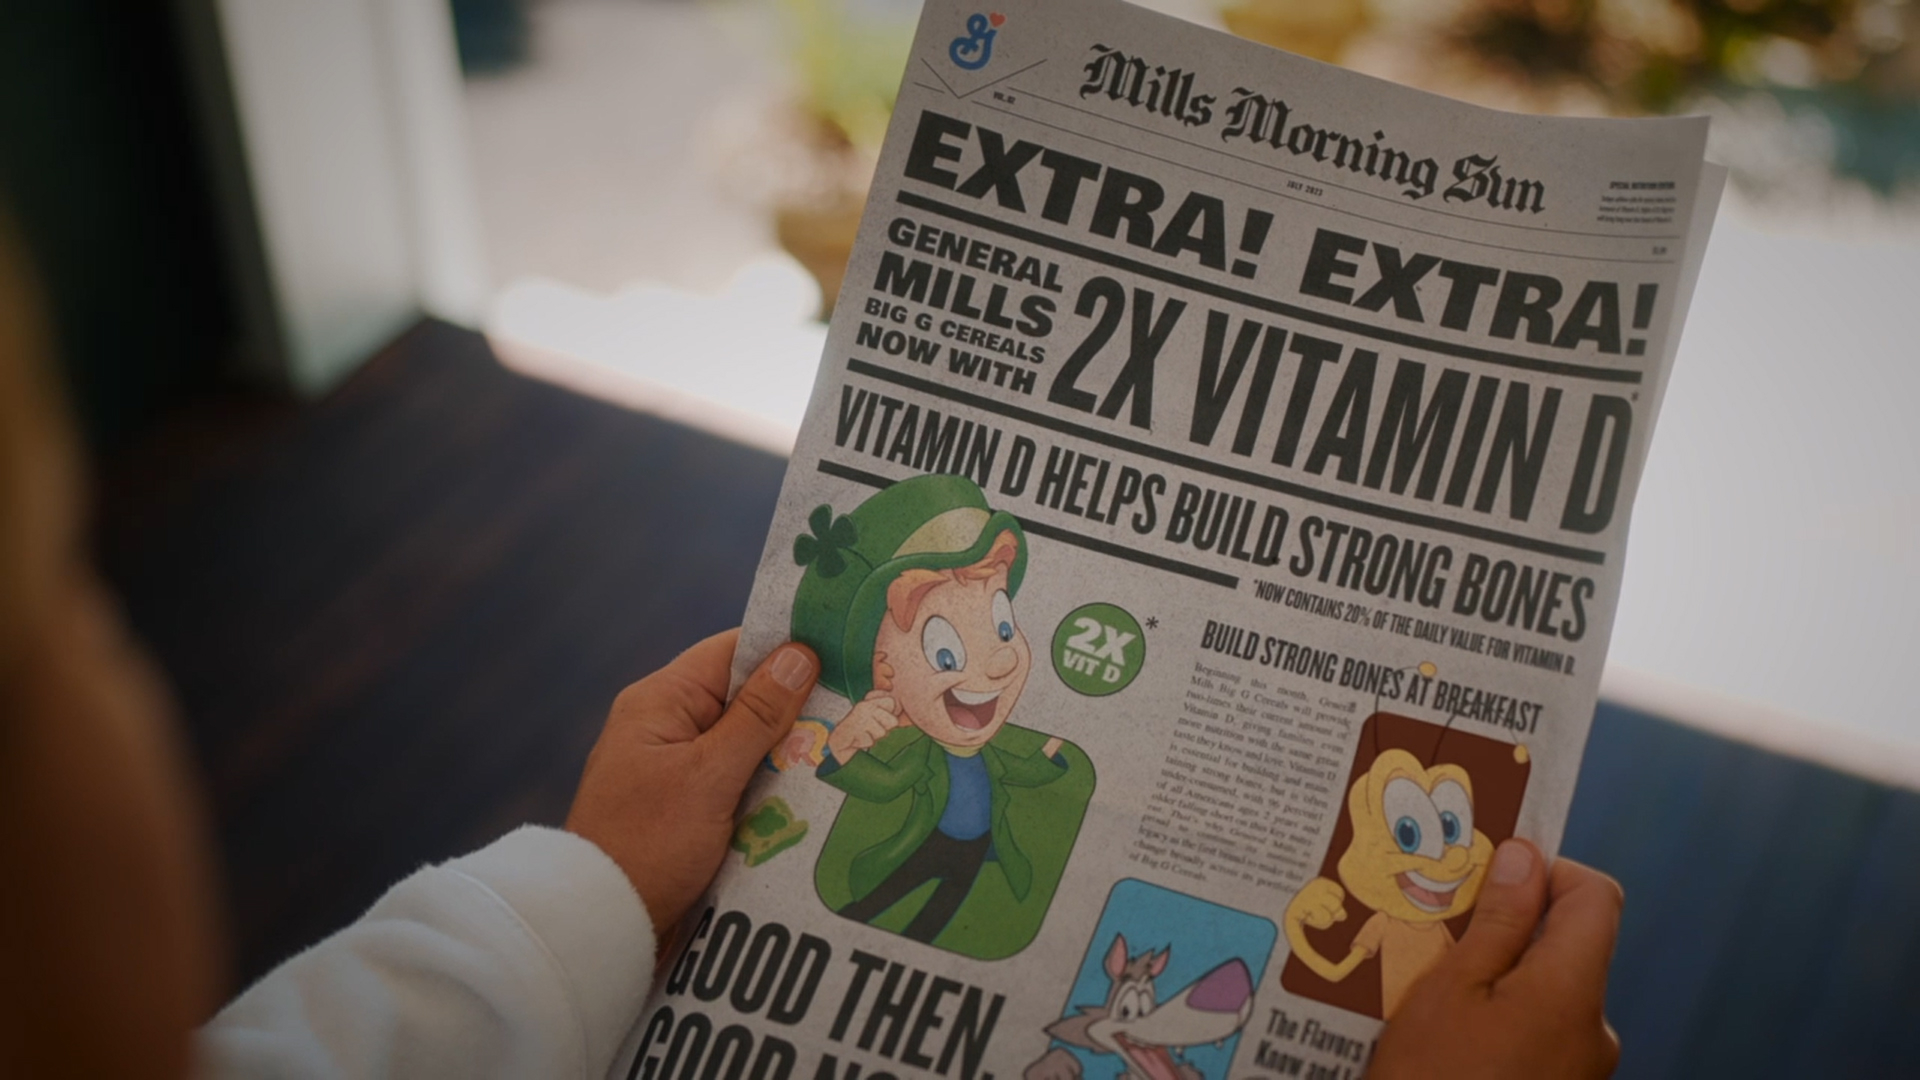 General Mills brings BIG news to the breakfast table this summer, doubling Vitamin D in Big G Cereals.